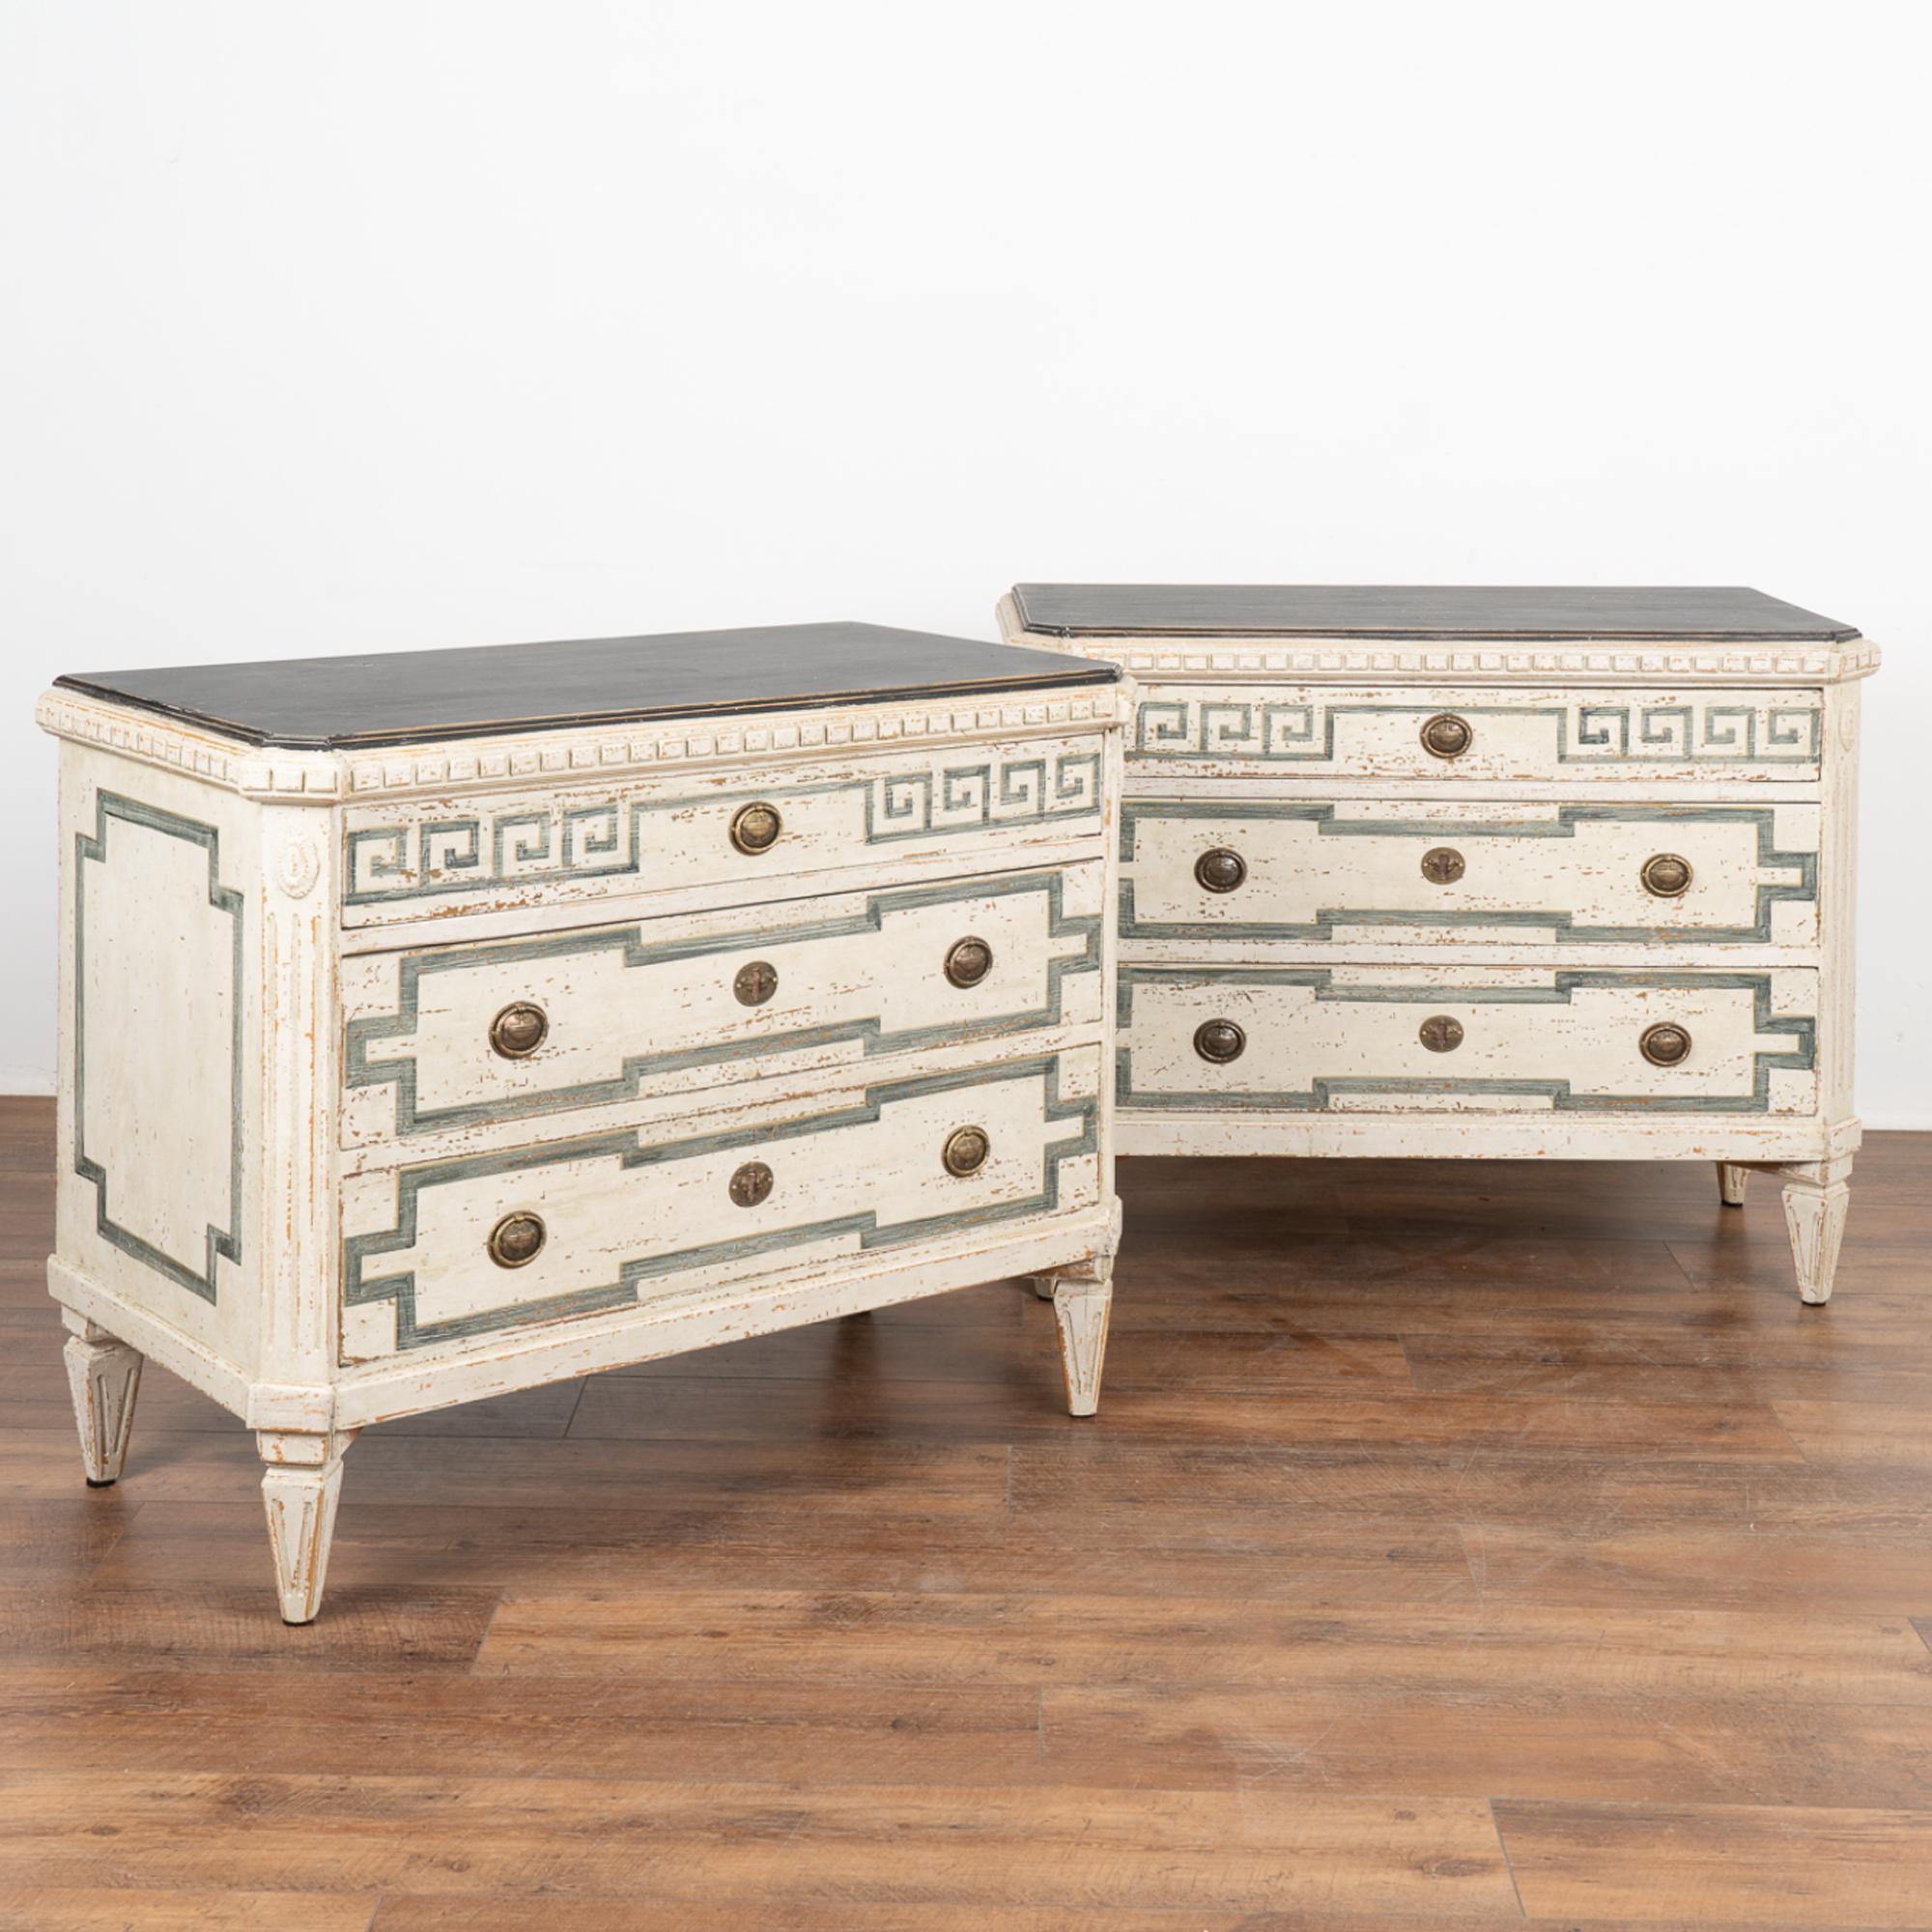 A pair of decorative pine Gustavian chest of drawers with traditional carved dentil moldings, canted fluted side posts with upper carved medallion, raised on four tapered fluted feet.
Three drawers, upper decorated with contrasting striated